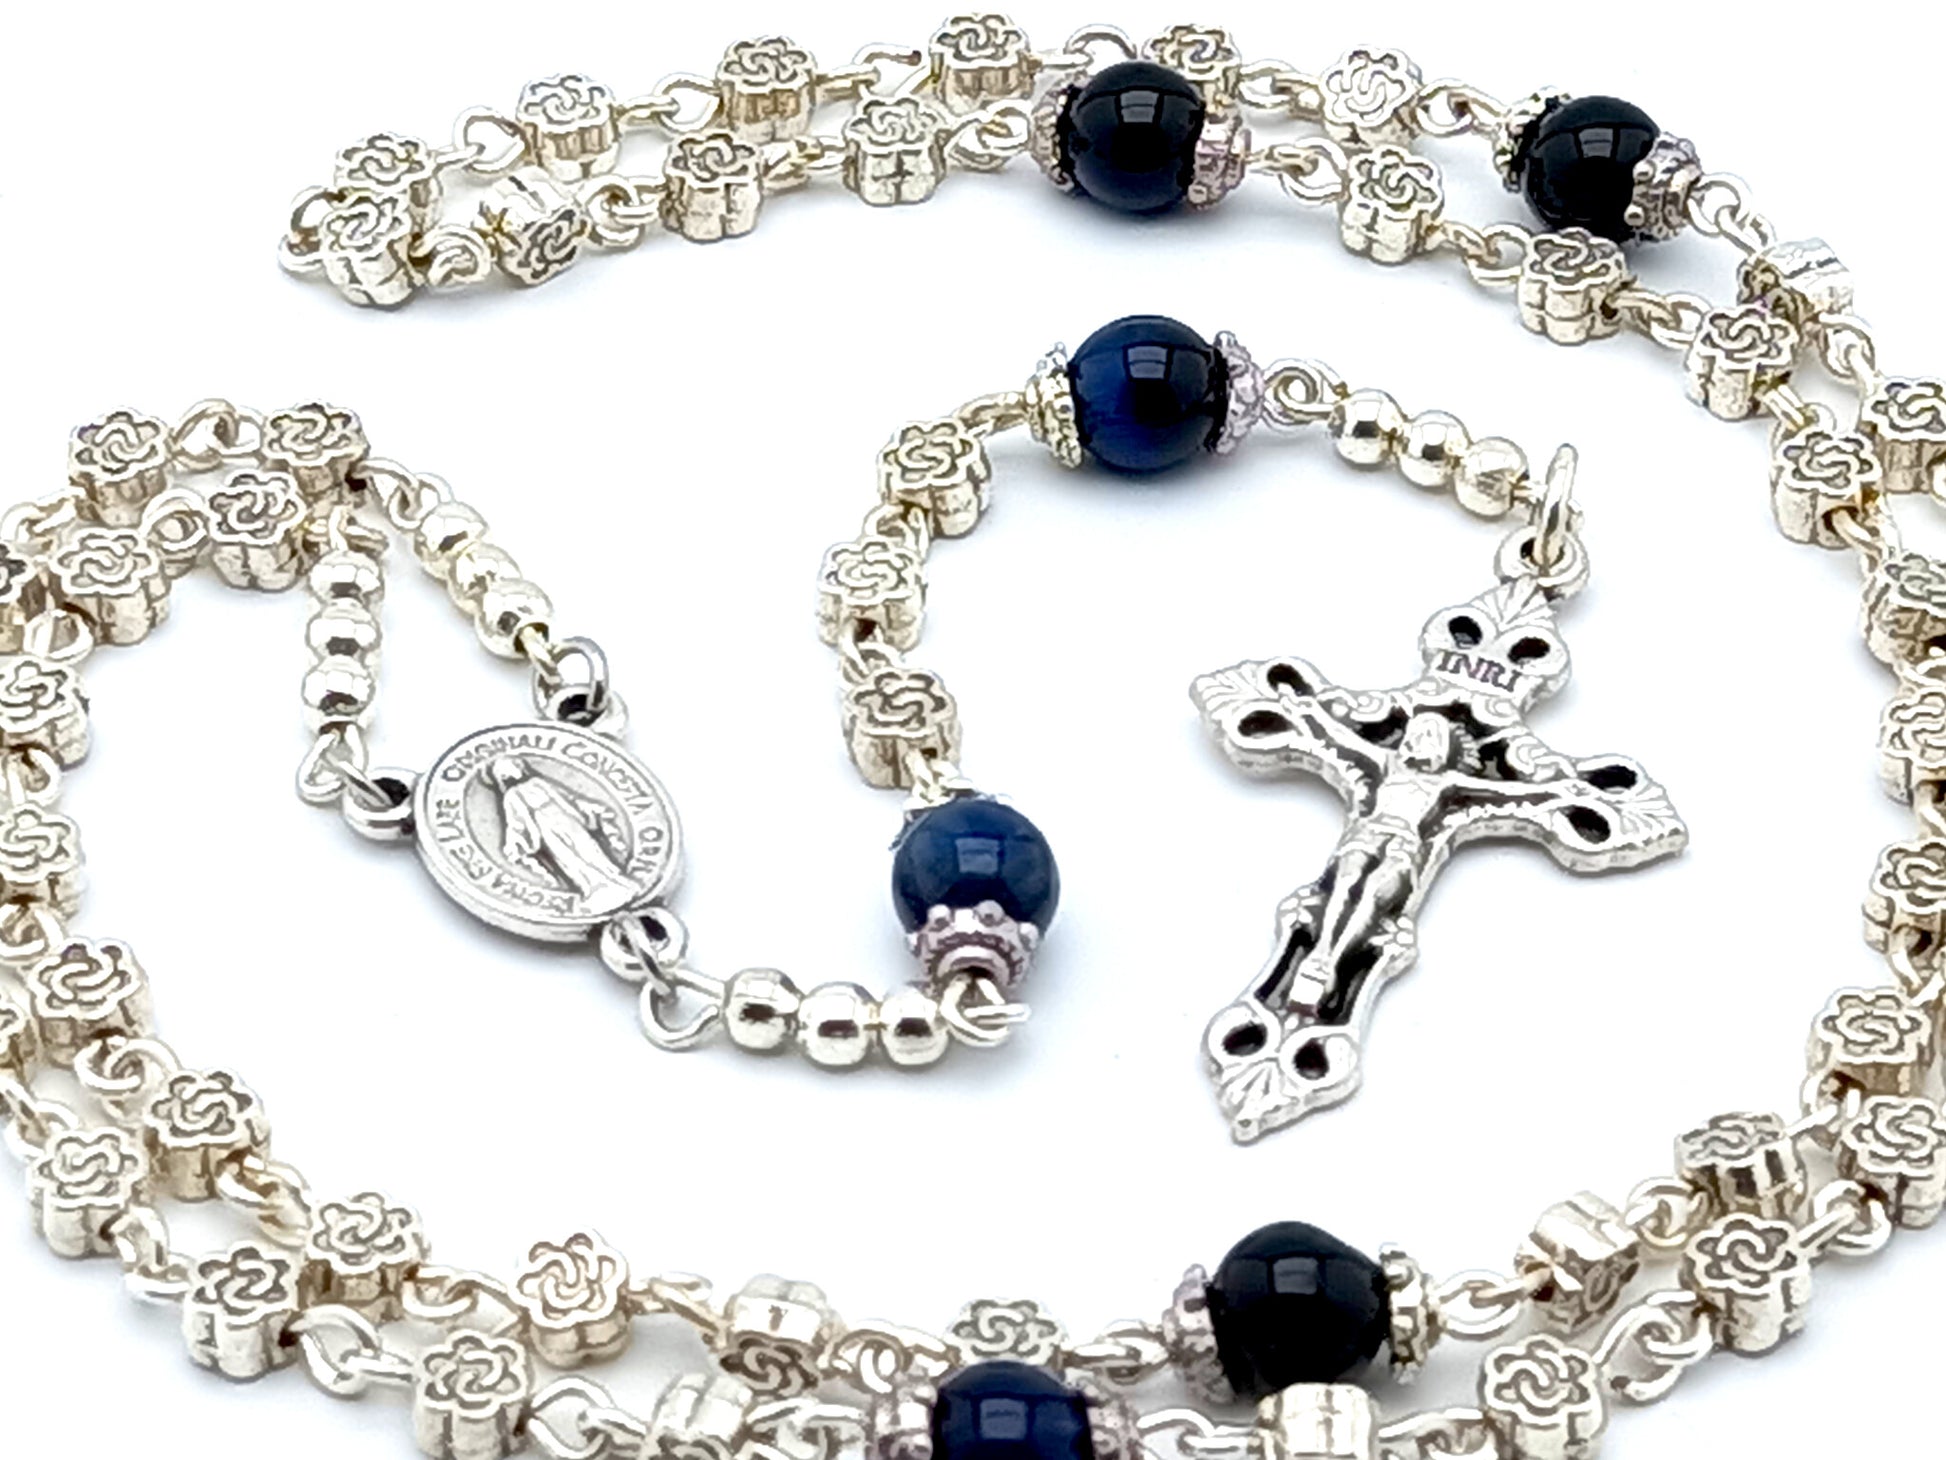 Miraculous Medal unique rosary beads miniature rosary with silver flower and blue beads, silver crucifix and centre medal.